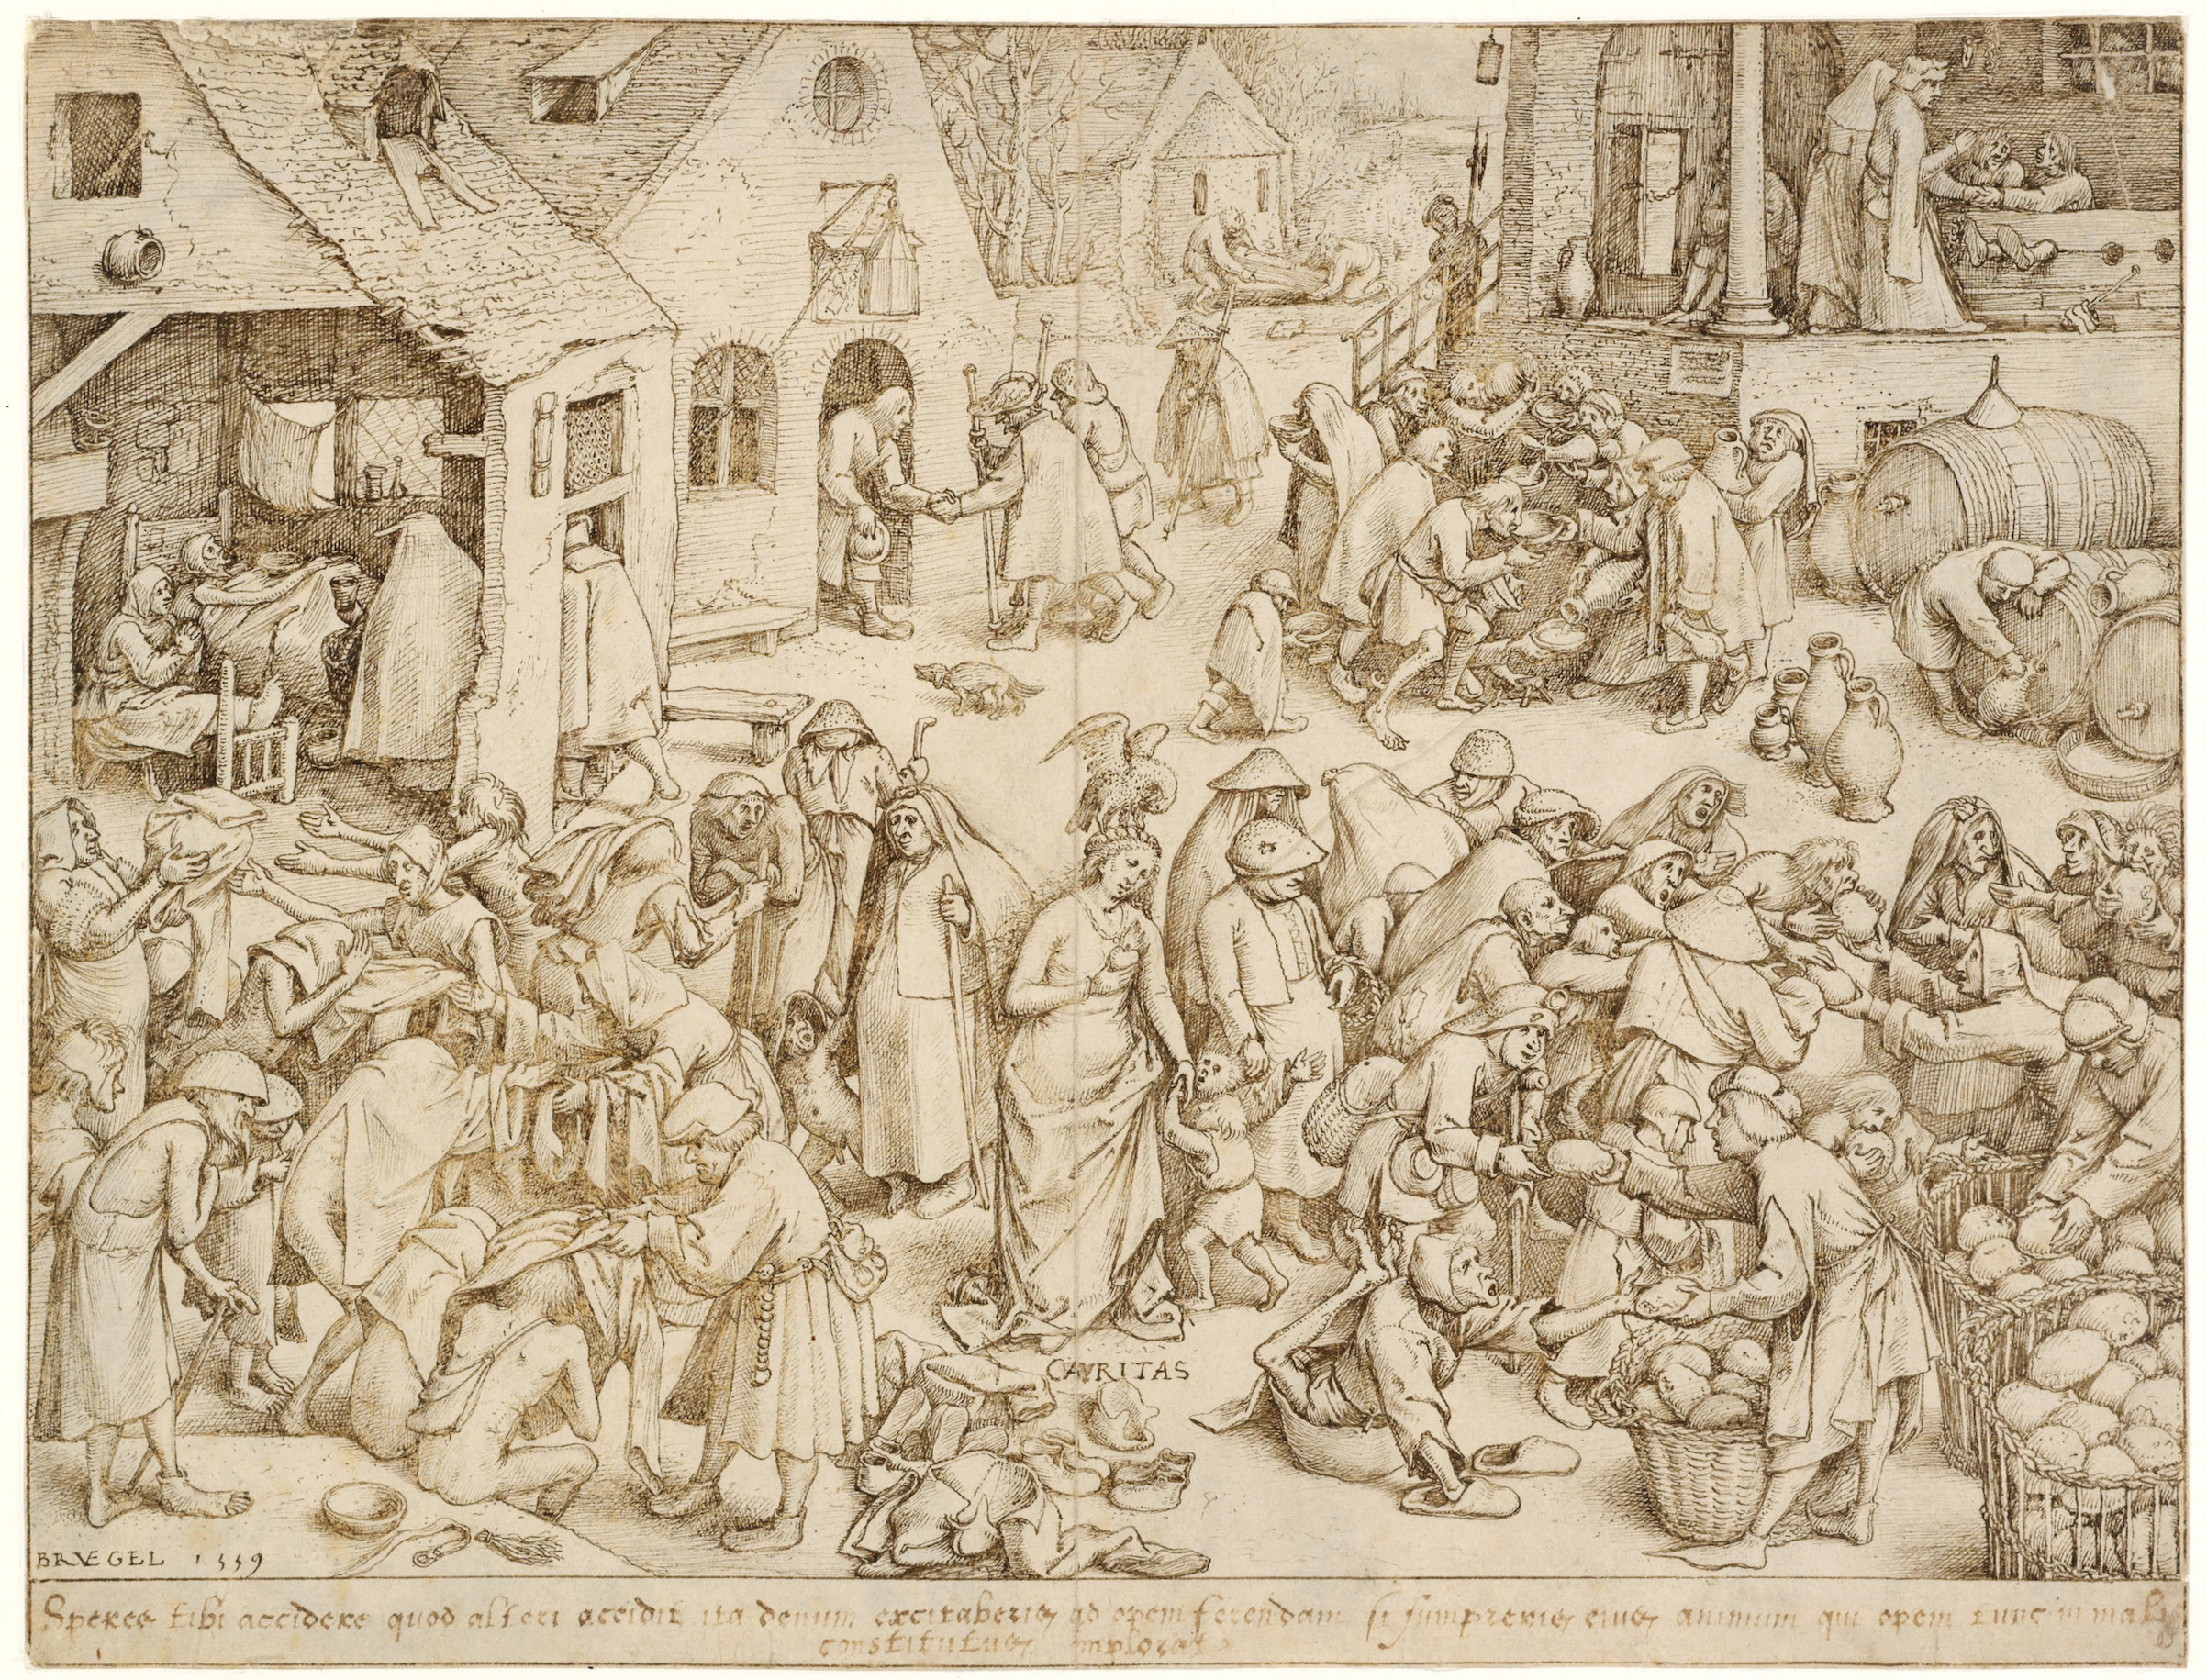 Caritas (Charity), 1559, by Pieter Bruegel the Elder. Found in the collection of the Museum Boijmans Van Beuningen, Rotterdam. (Heritage Images/Getty Images)